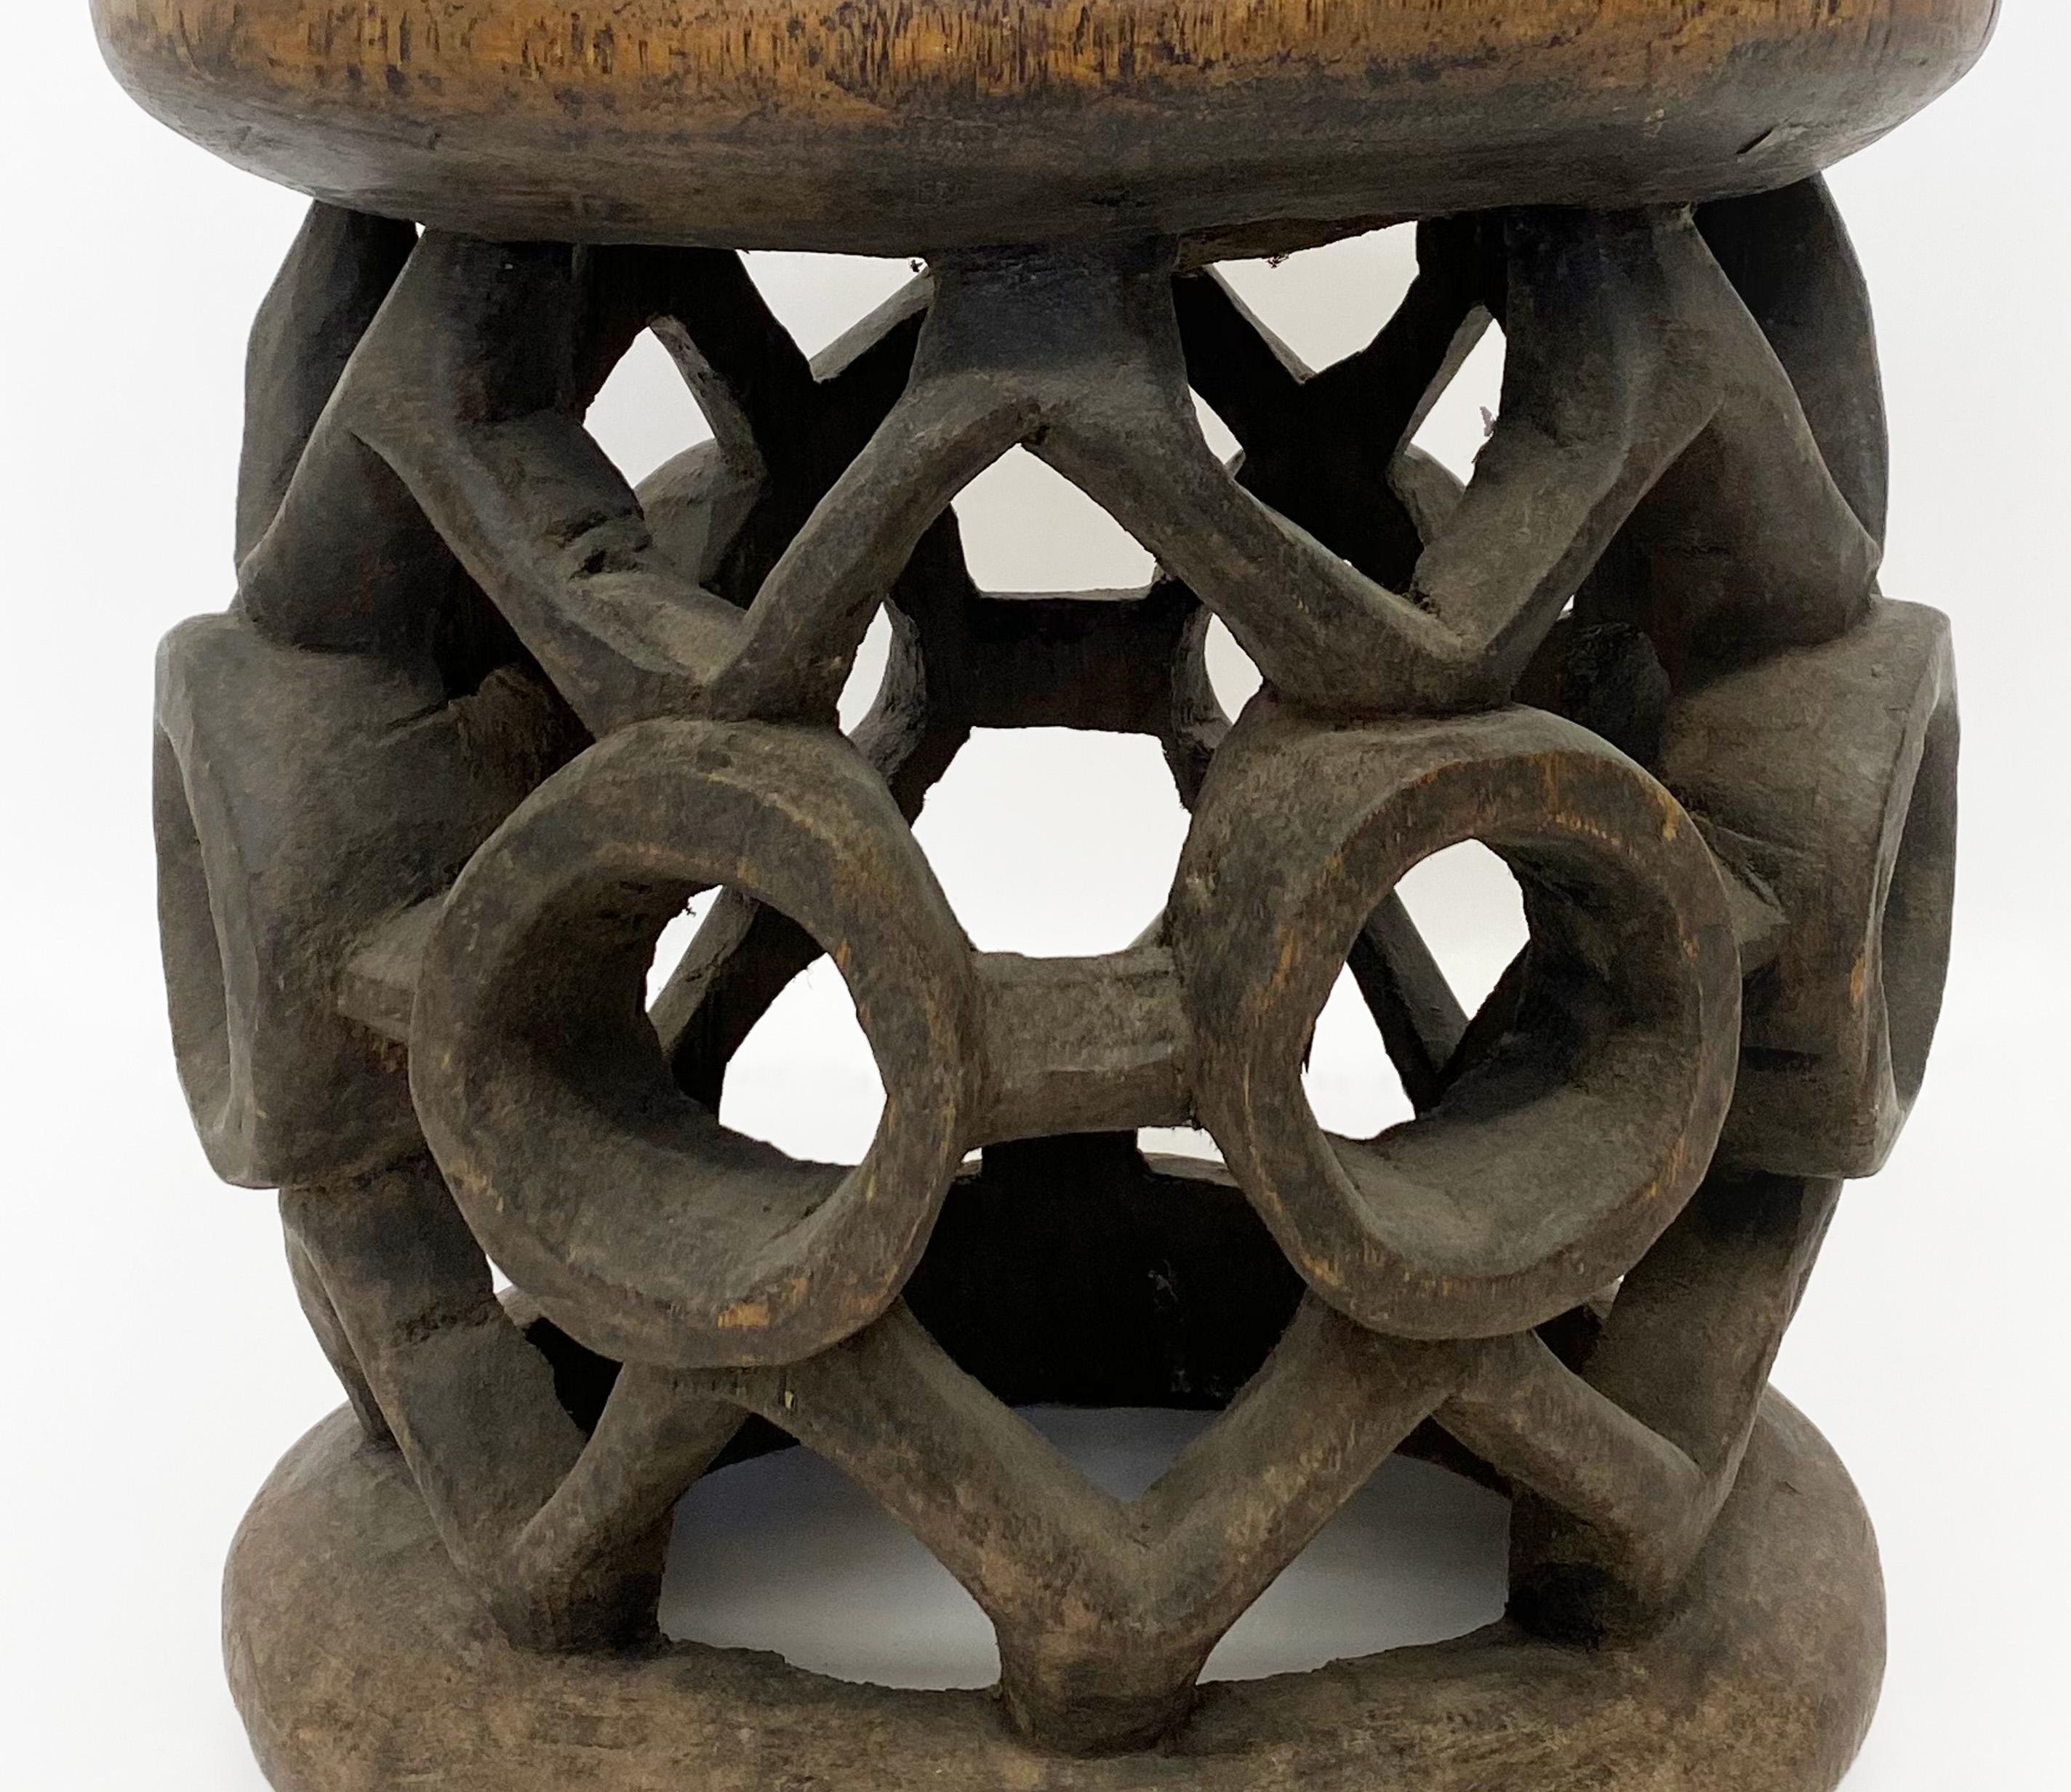 Beautifully hand made african Bamileke stool. Bamileke stools are carved from a large single piece of wood. Traditionally used in ceremonial seating by the Bamileke tribe of Cameroon.